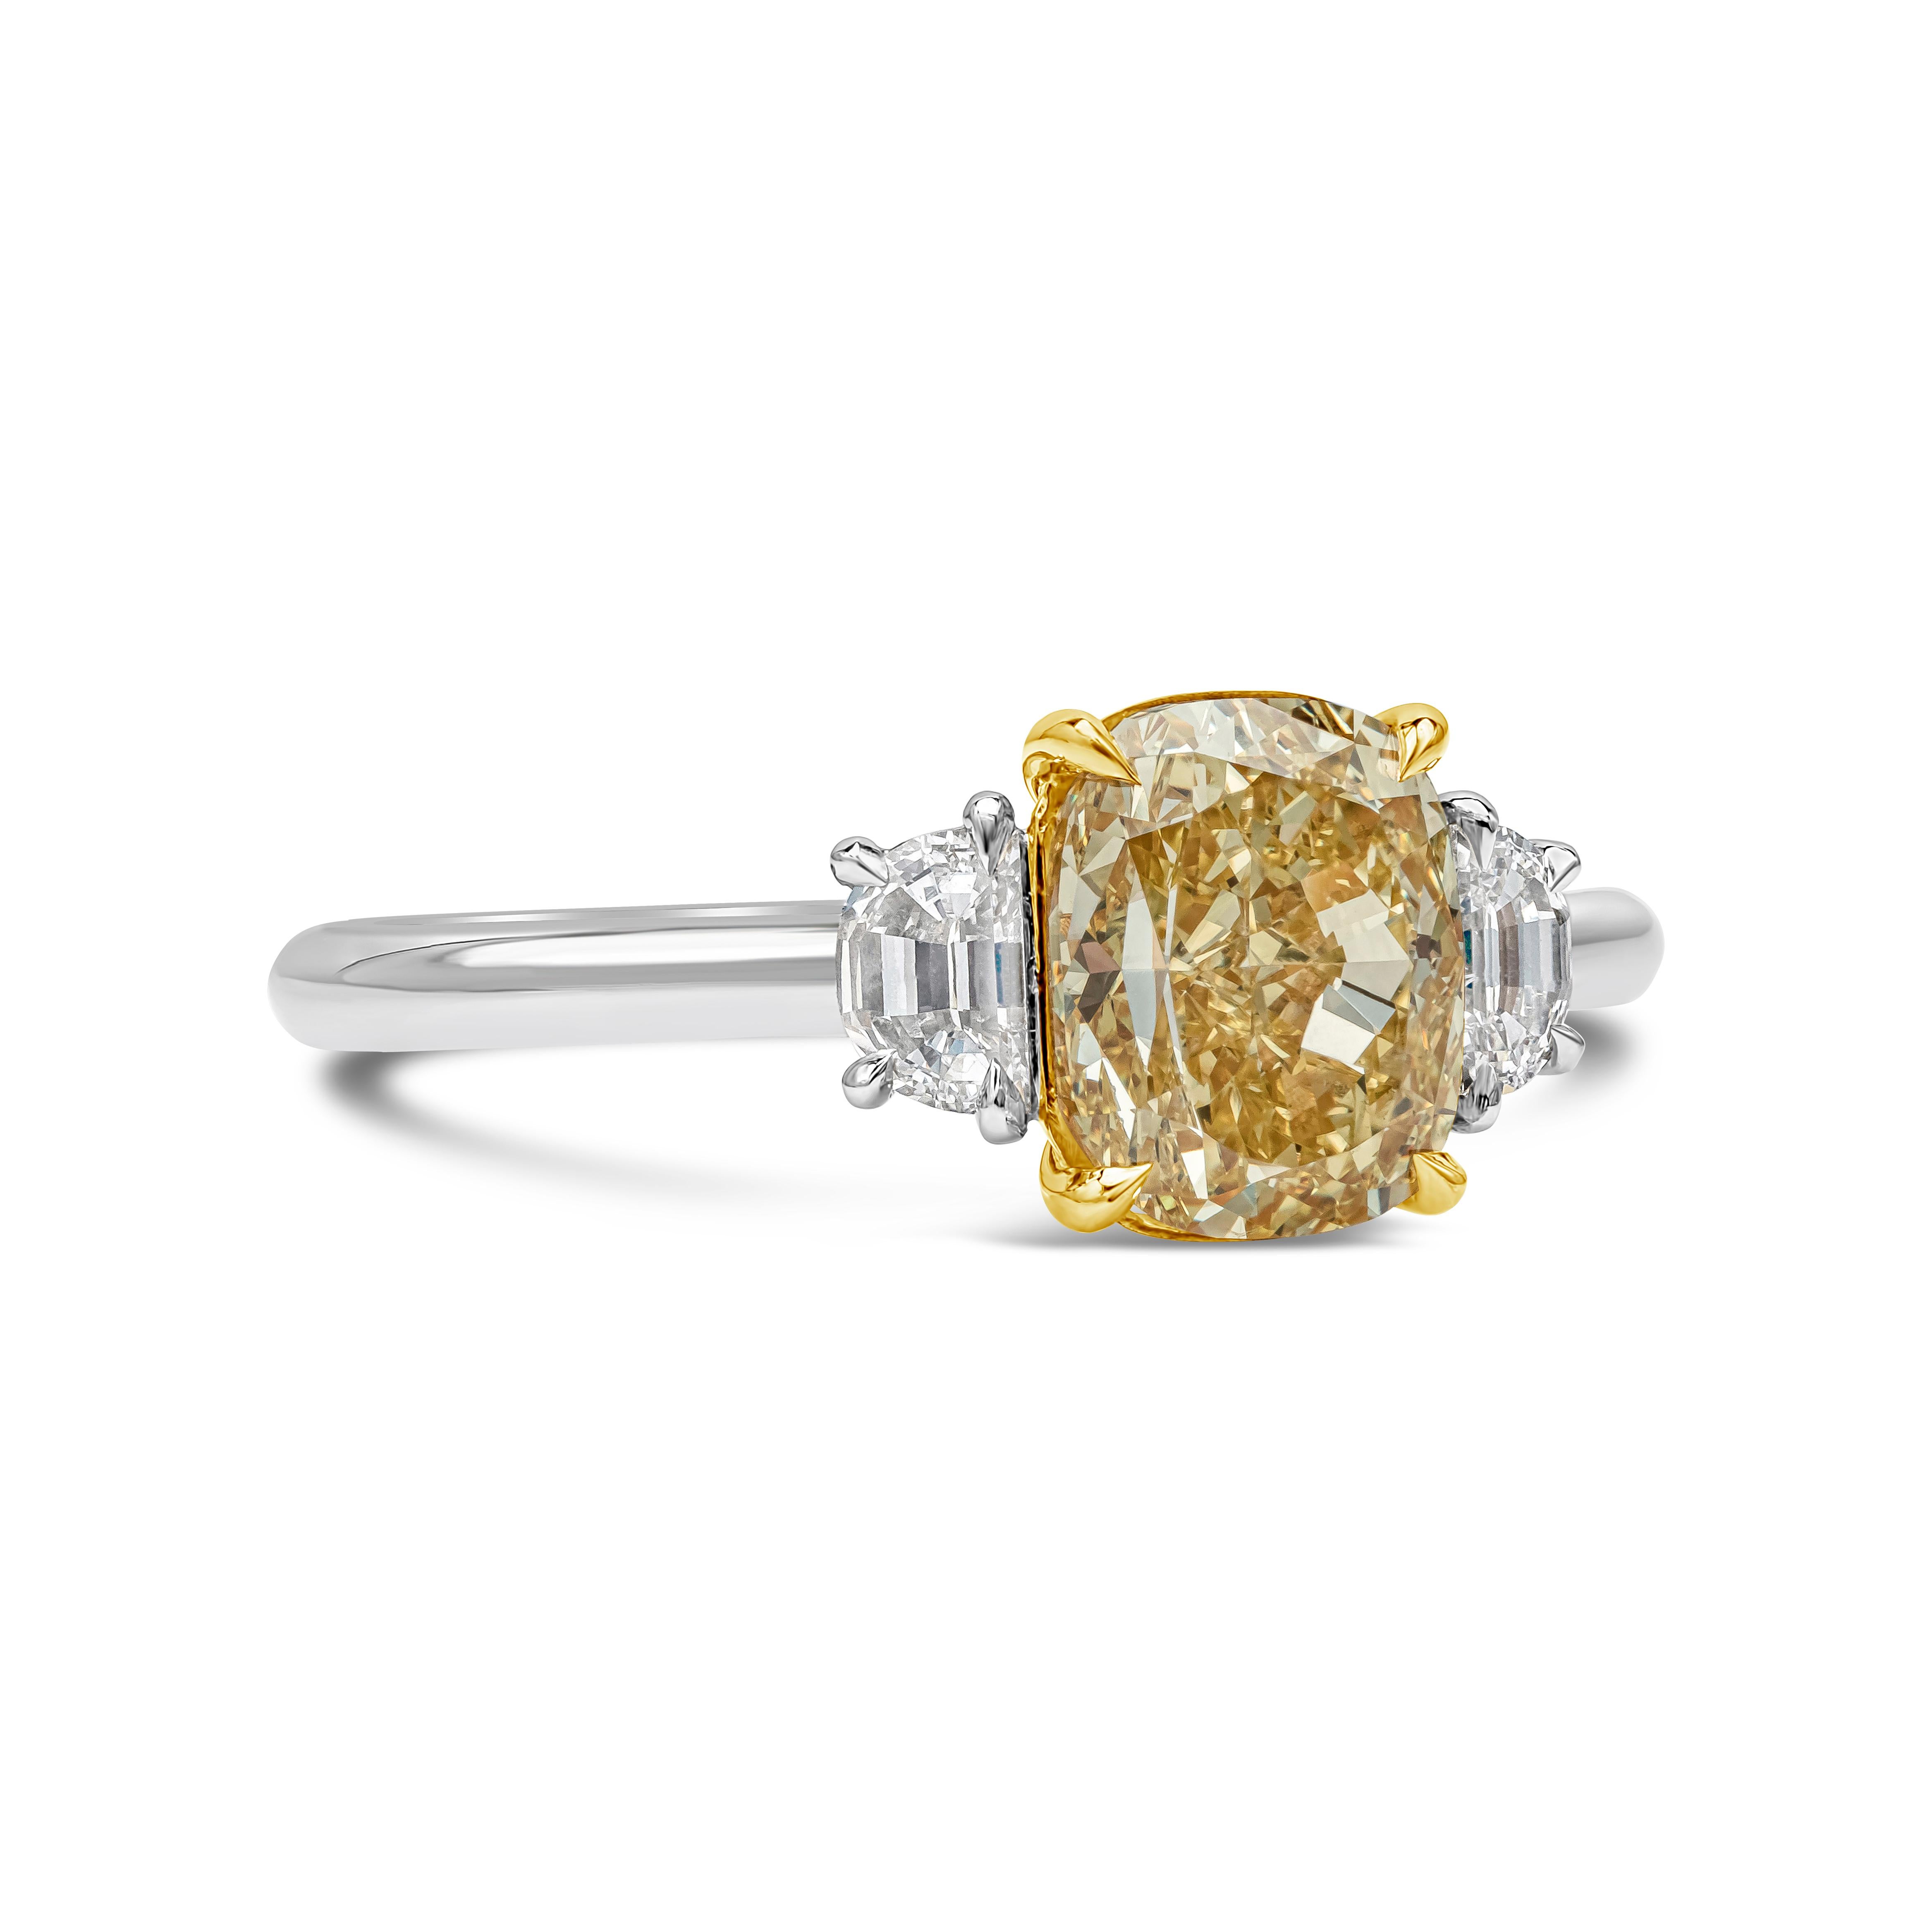 Features a 2.03 carats cushion cut yellow diamond certified by GIA as fancy Intense Yellow color, VS2 in clarity, set in a classic four prong basket setting. Flanking the center stone are two step-cut half moon diamonds on each side, set in a